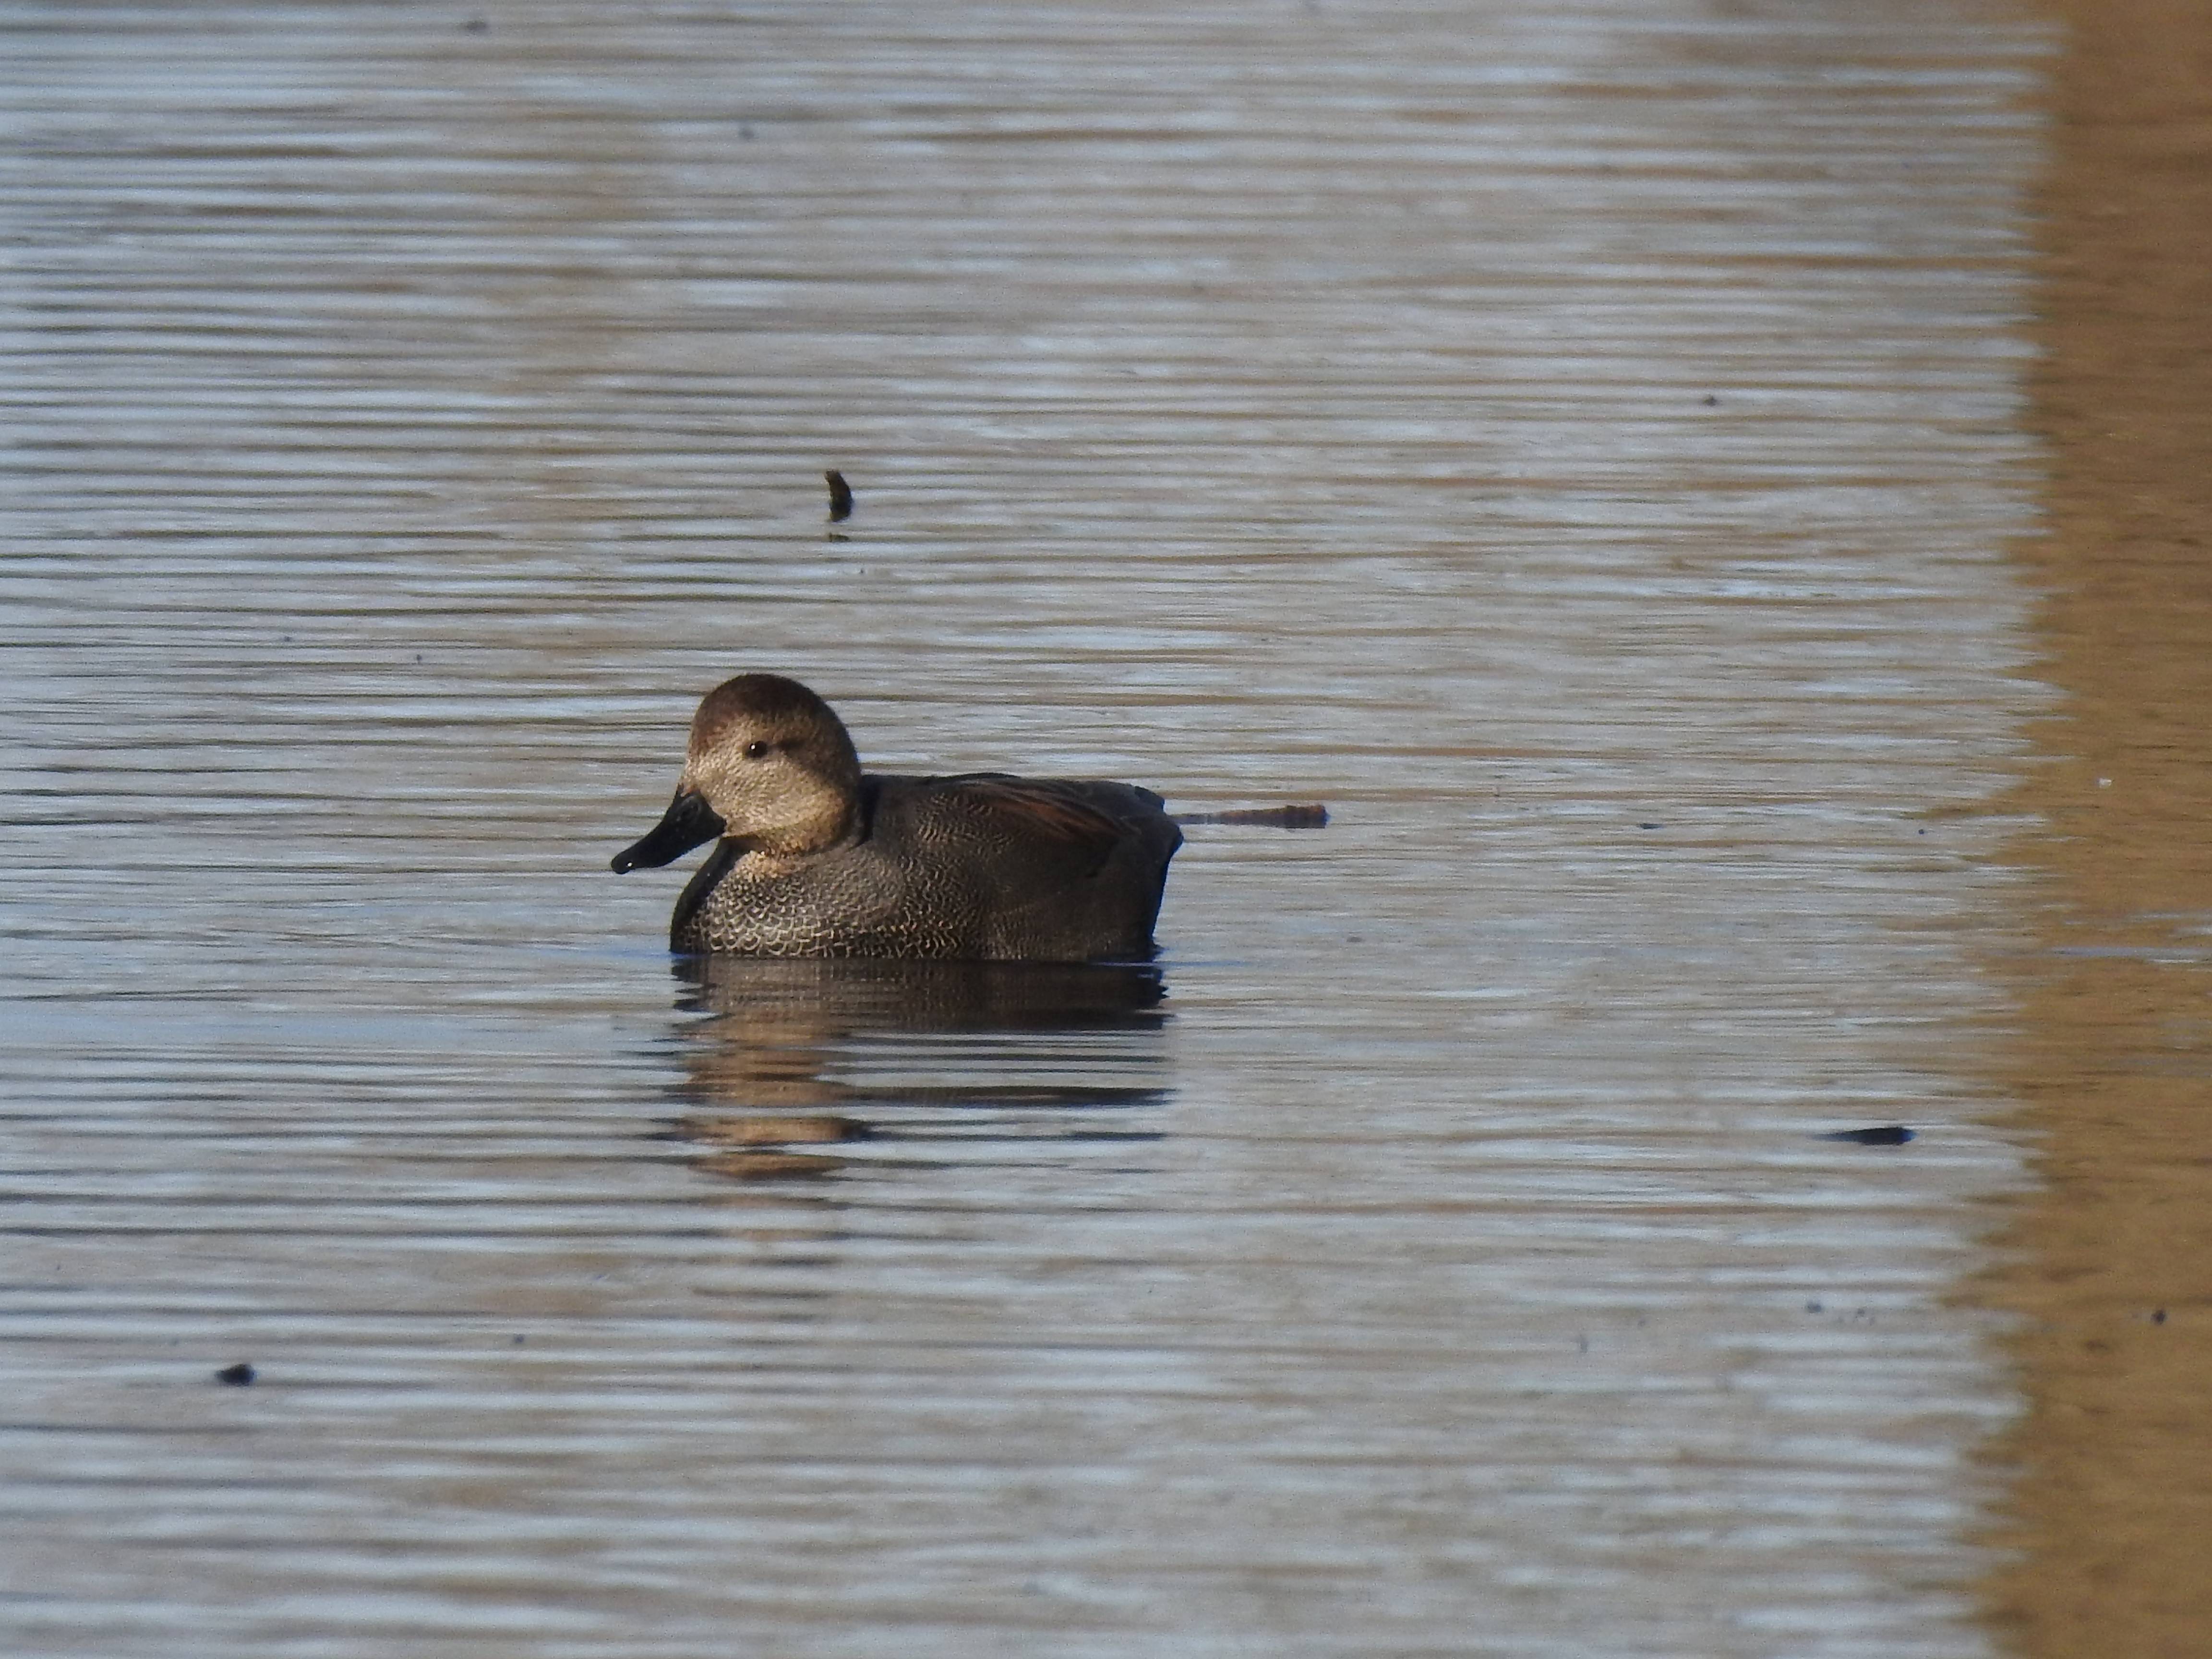 An image of a gadwall duck swimming.